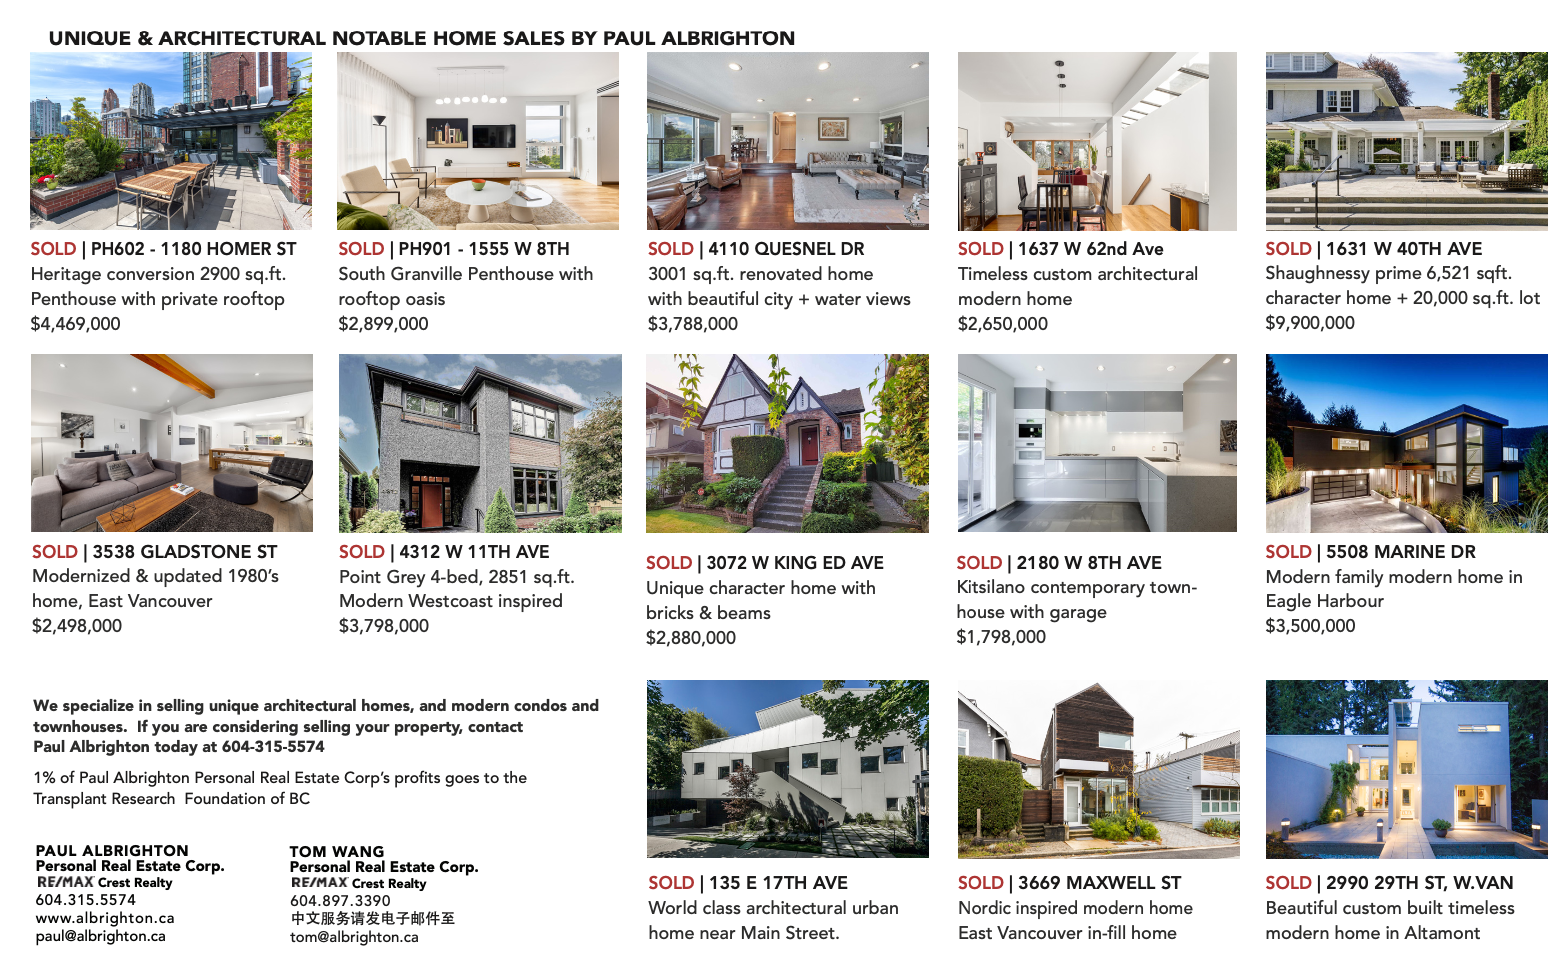 westside east vancouver and north shore modern home notable sales